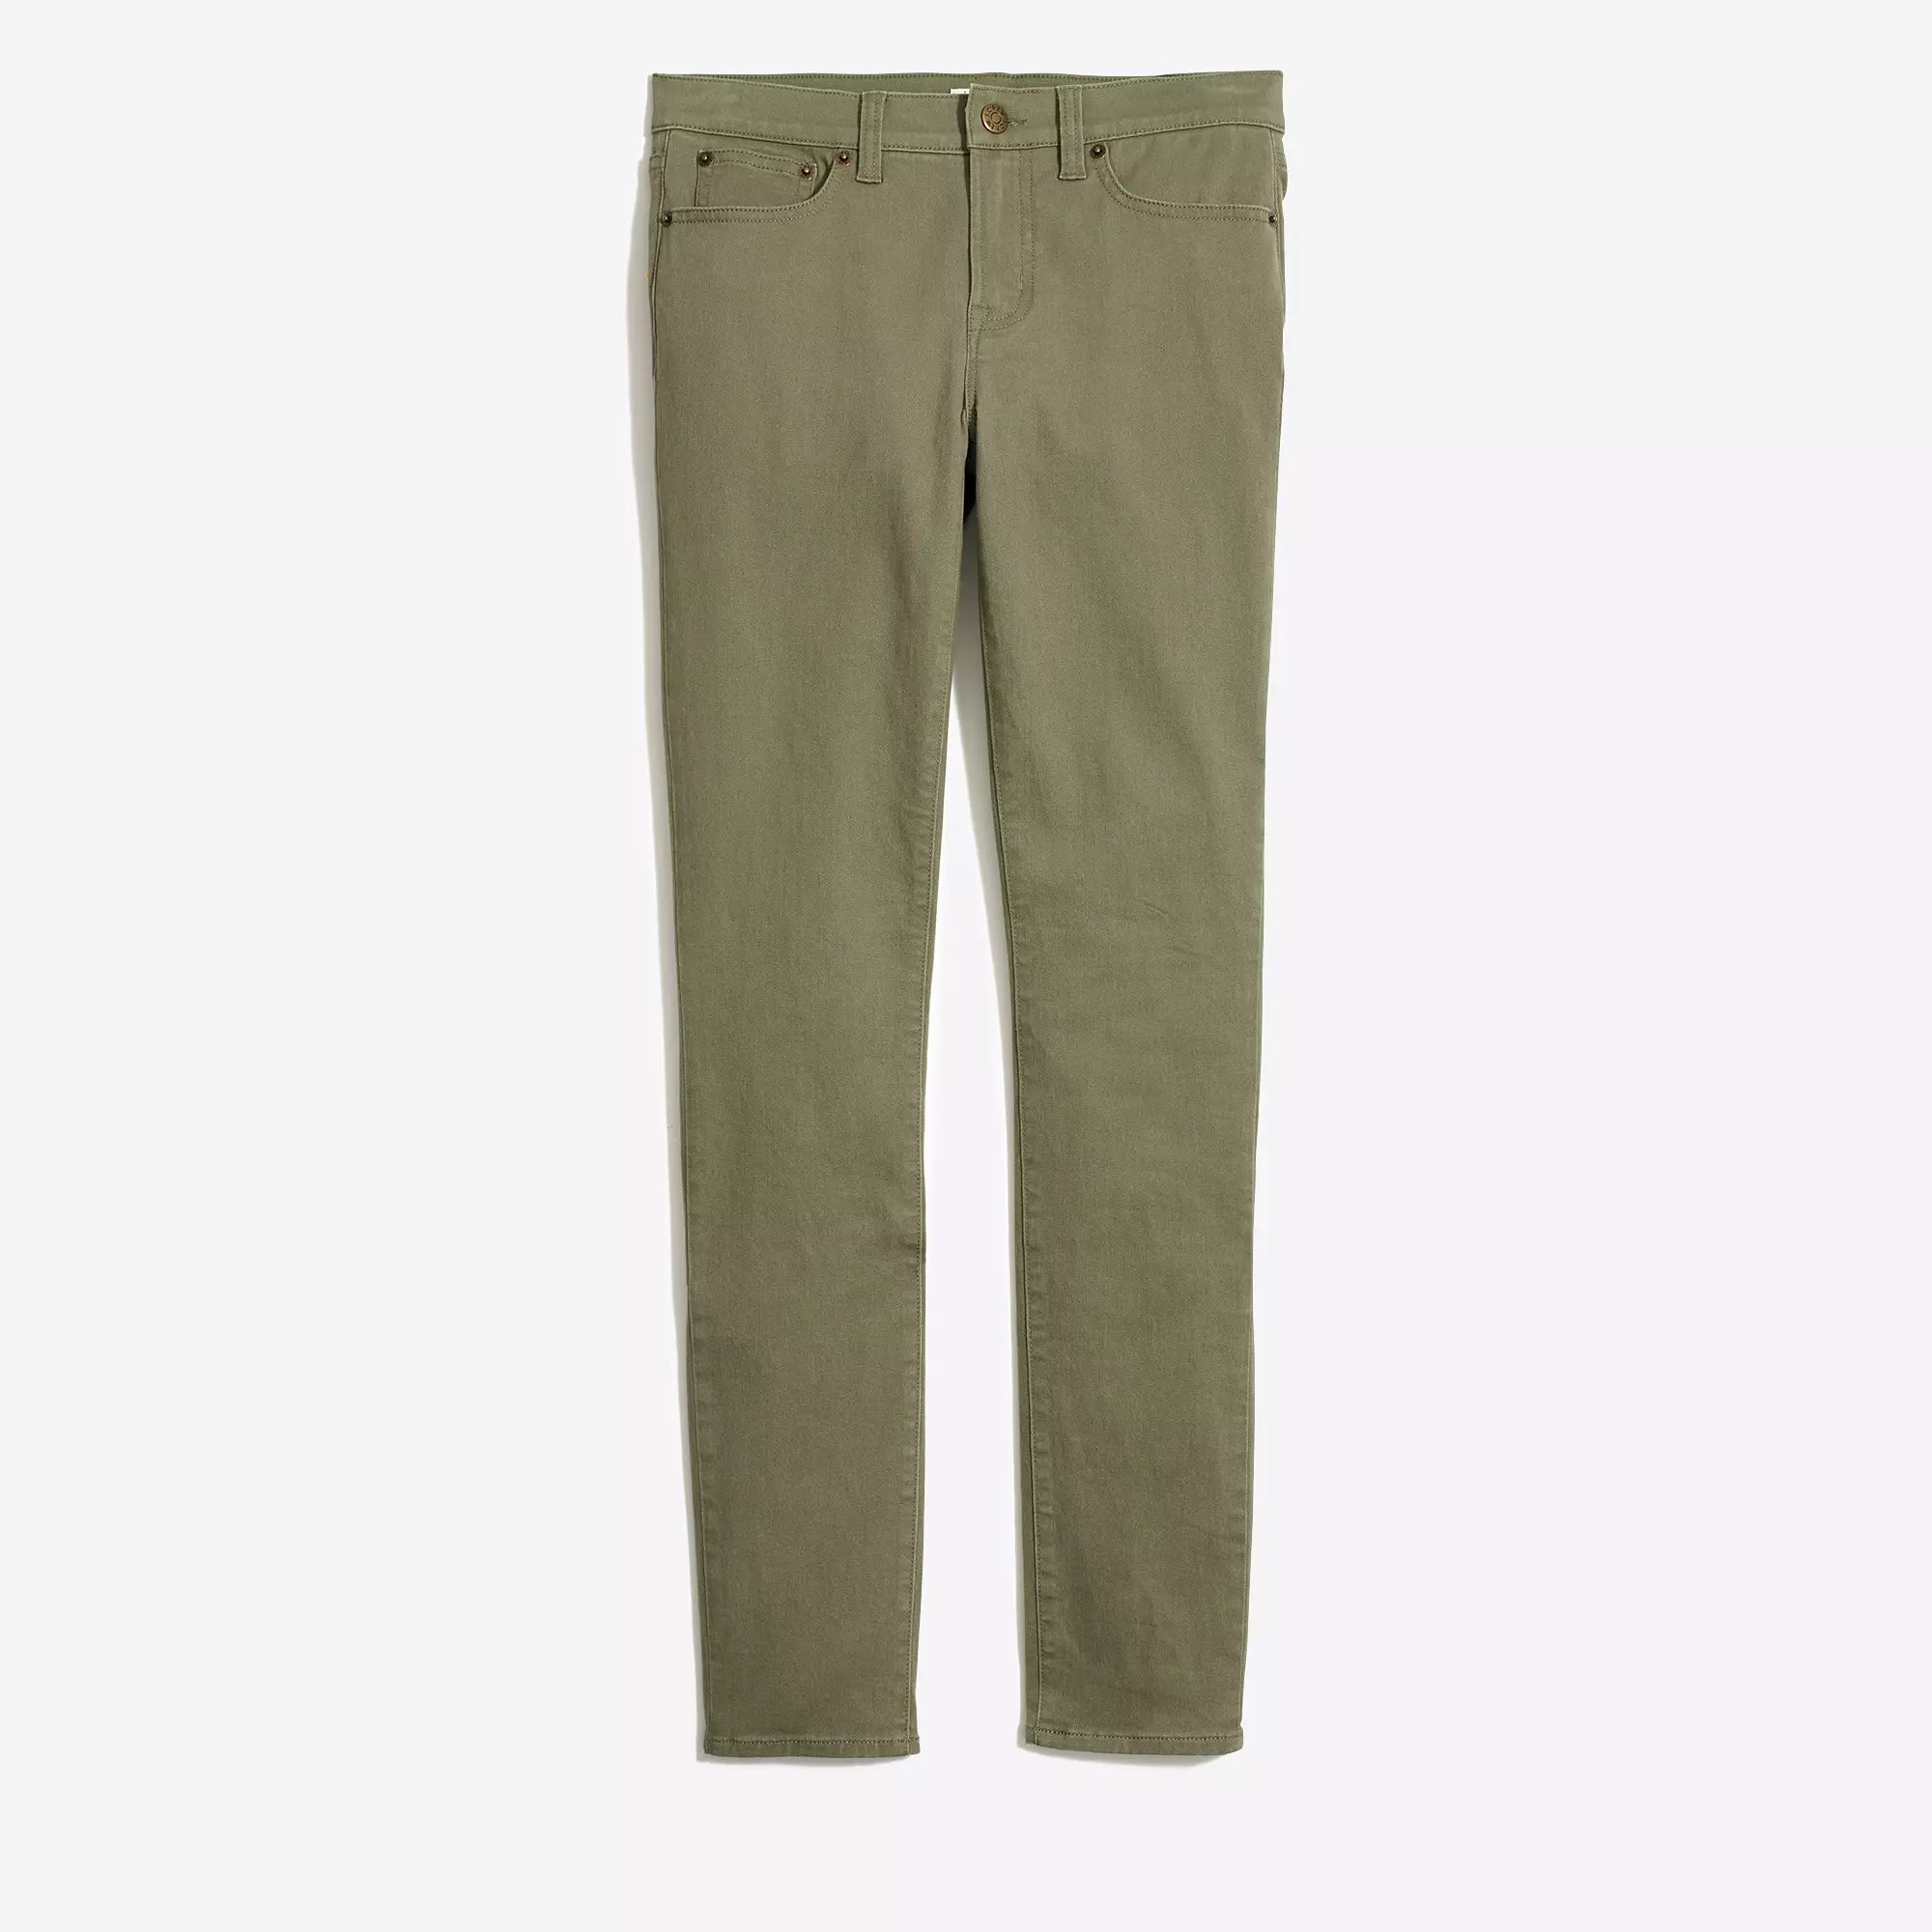 Skinny 5-pocket pant with 28" inseam | J.Crew Factory